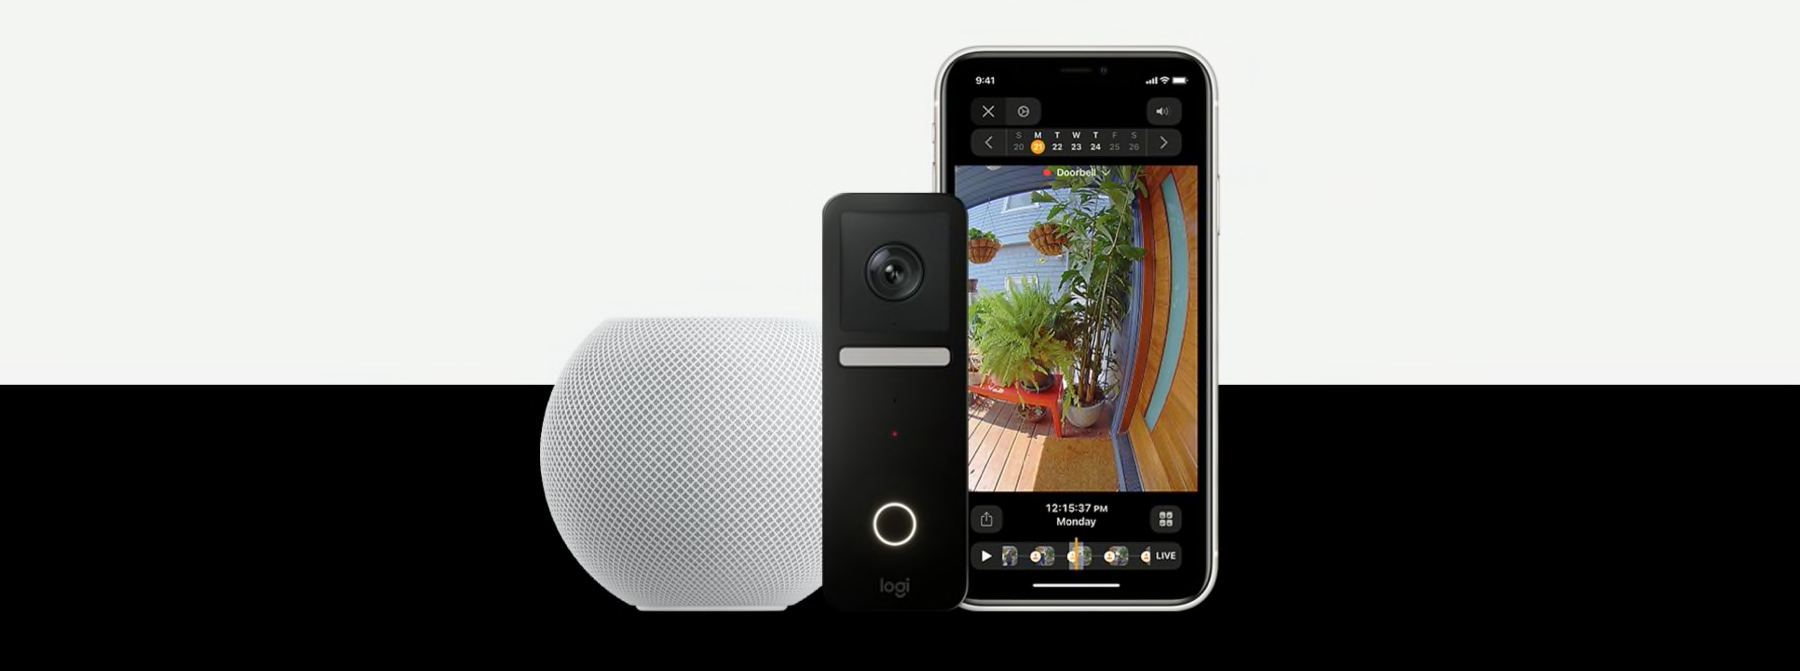 CIRCLE VIEW BUILT WITH HomeKit SECURE VIDEO